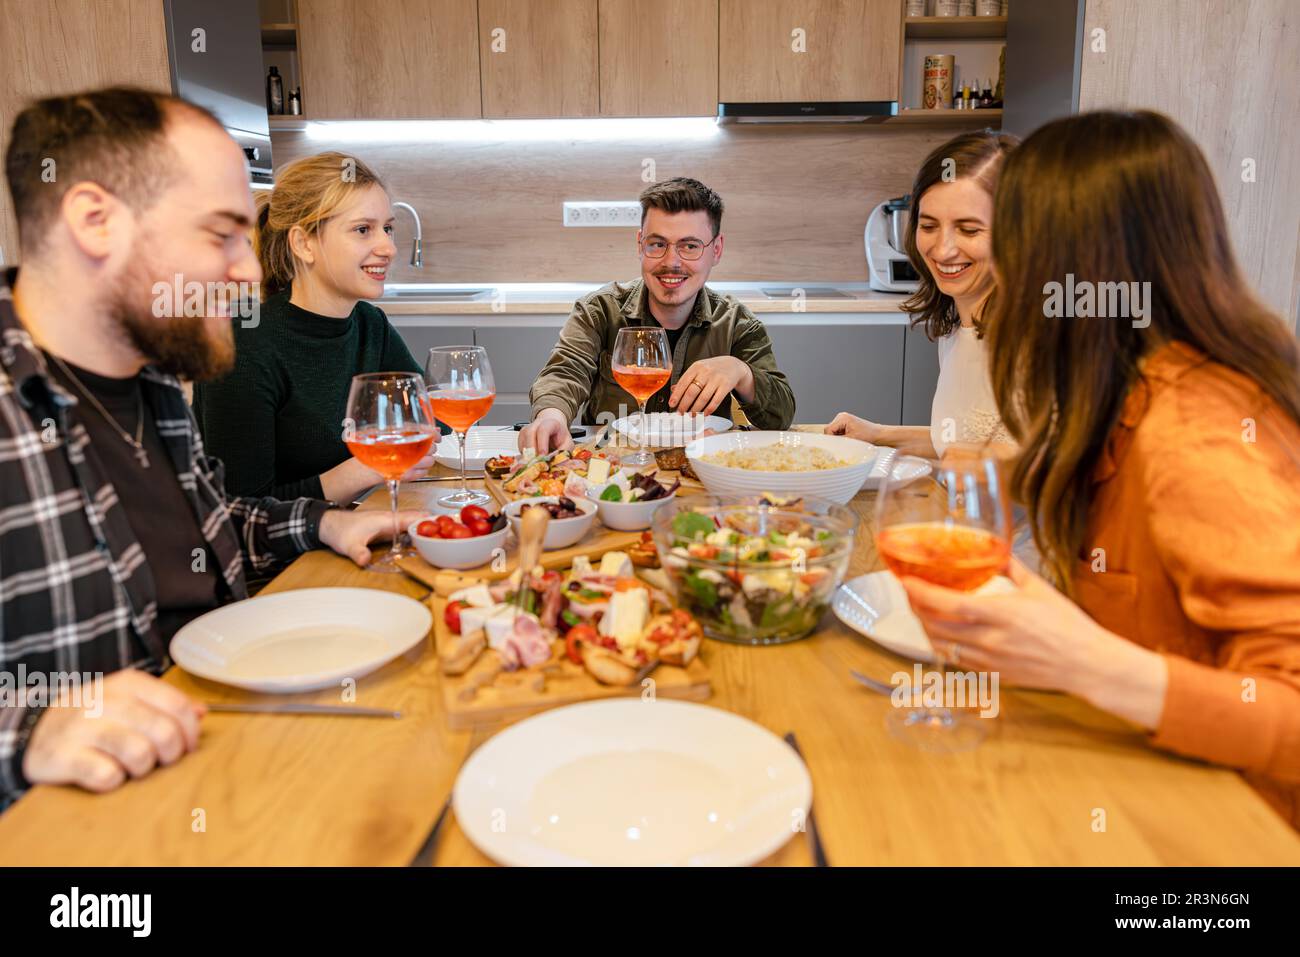 Friends enjoying eating together and laughing Stock Photo